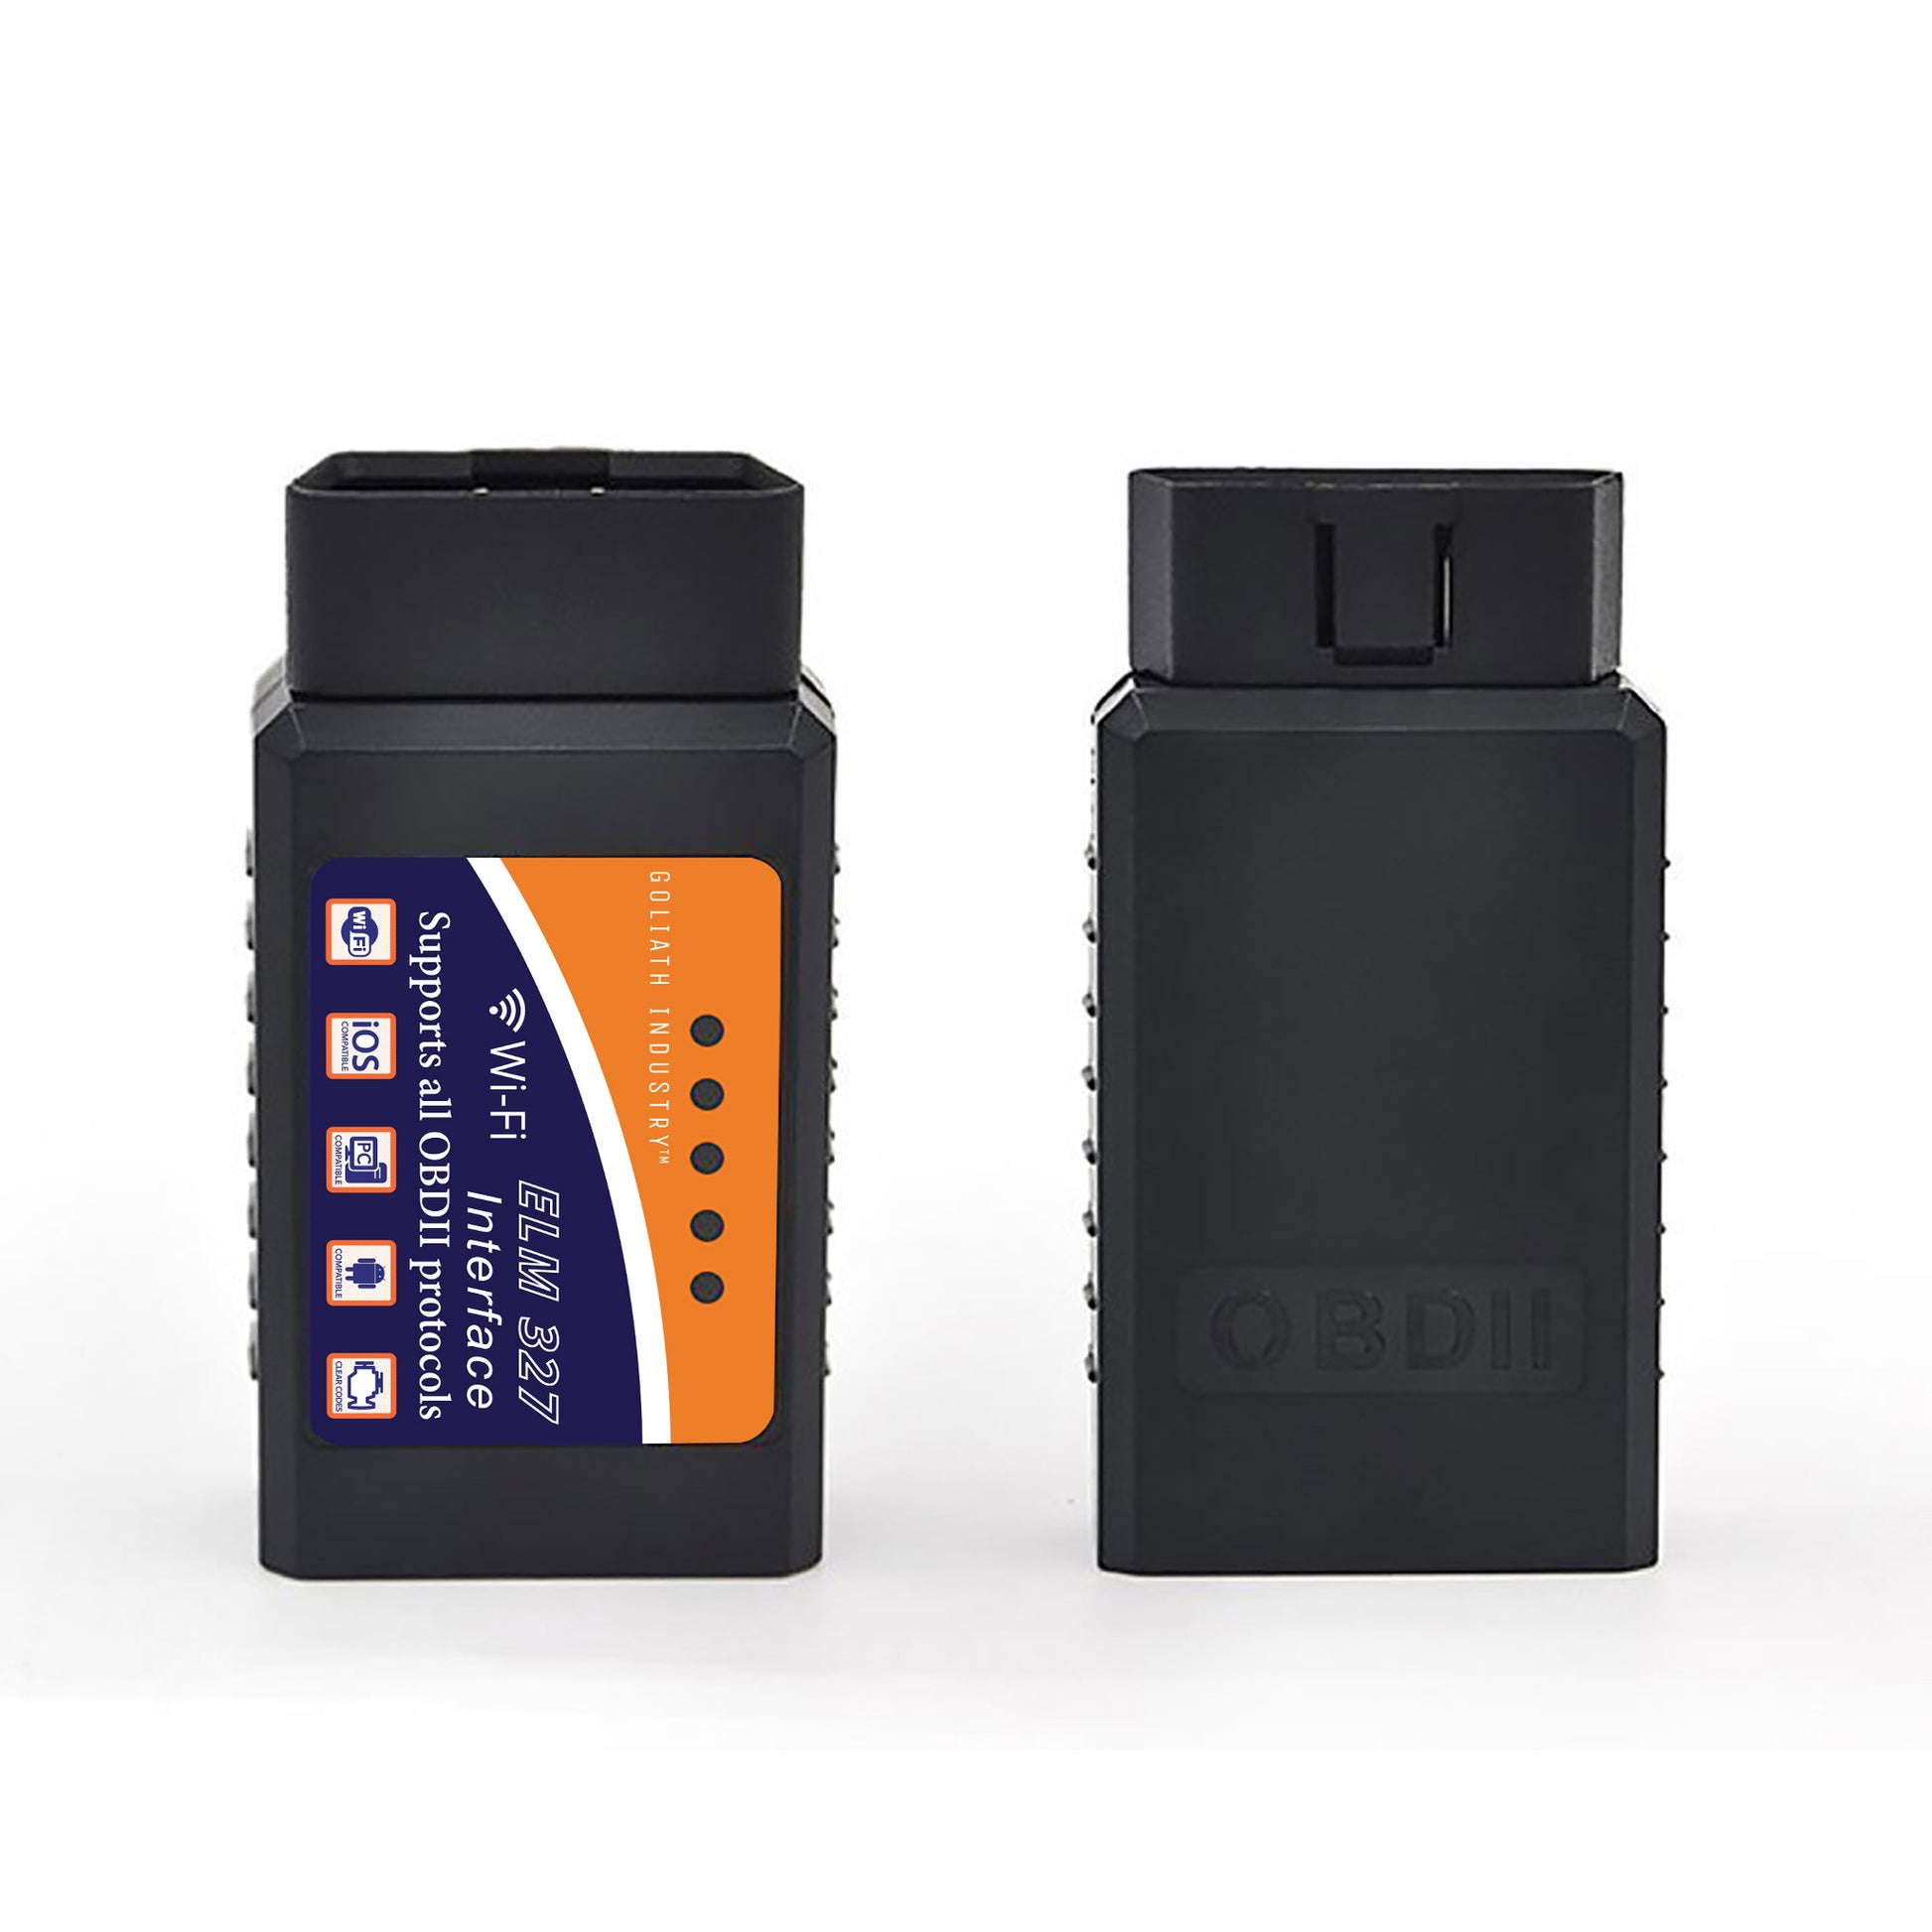  for Android Phones ONLY - Wireless Bluetooth Diagnostic OBD2  Scanner Car Code Reader and Scan Tool for All 1996 & Newer Vehicles ELM327  Compatible OBDII : Automotive